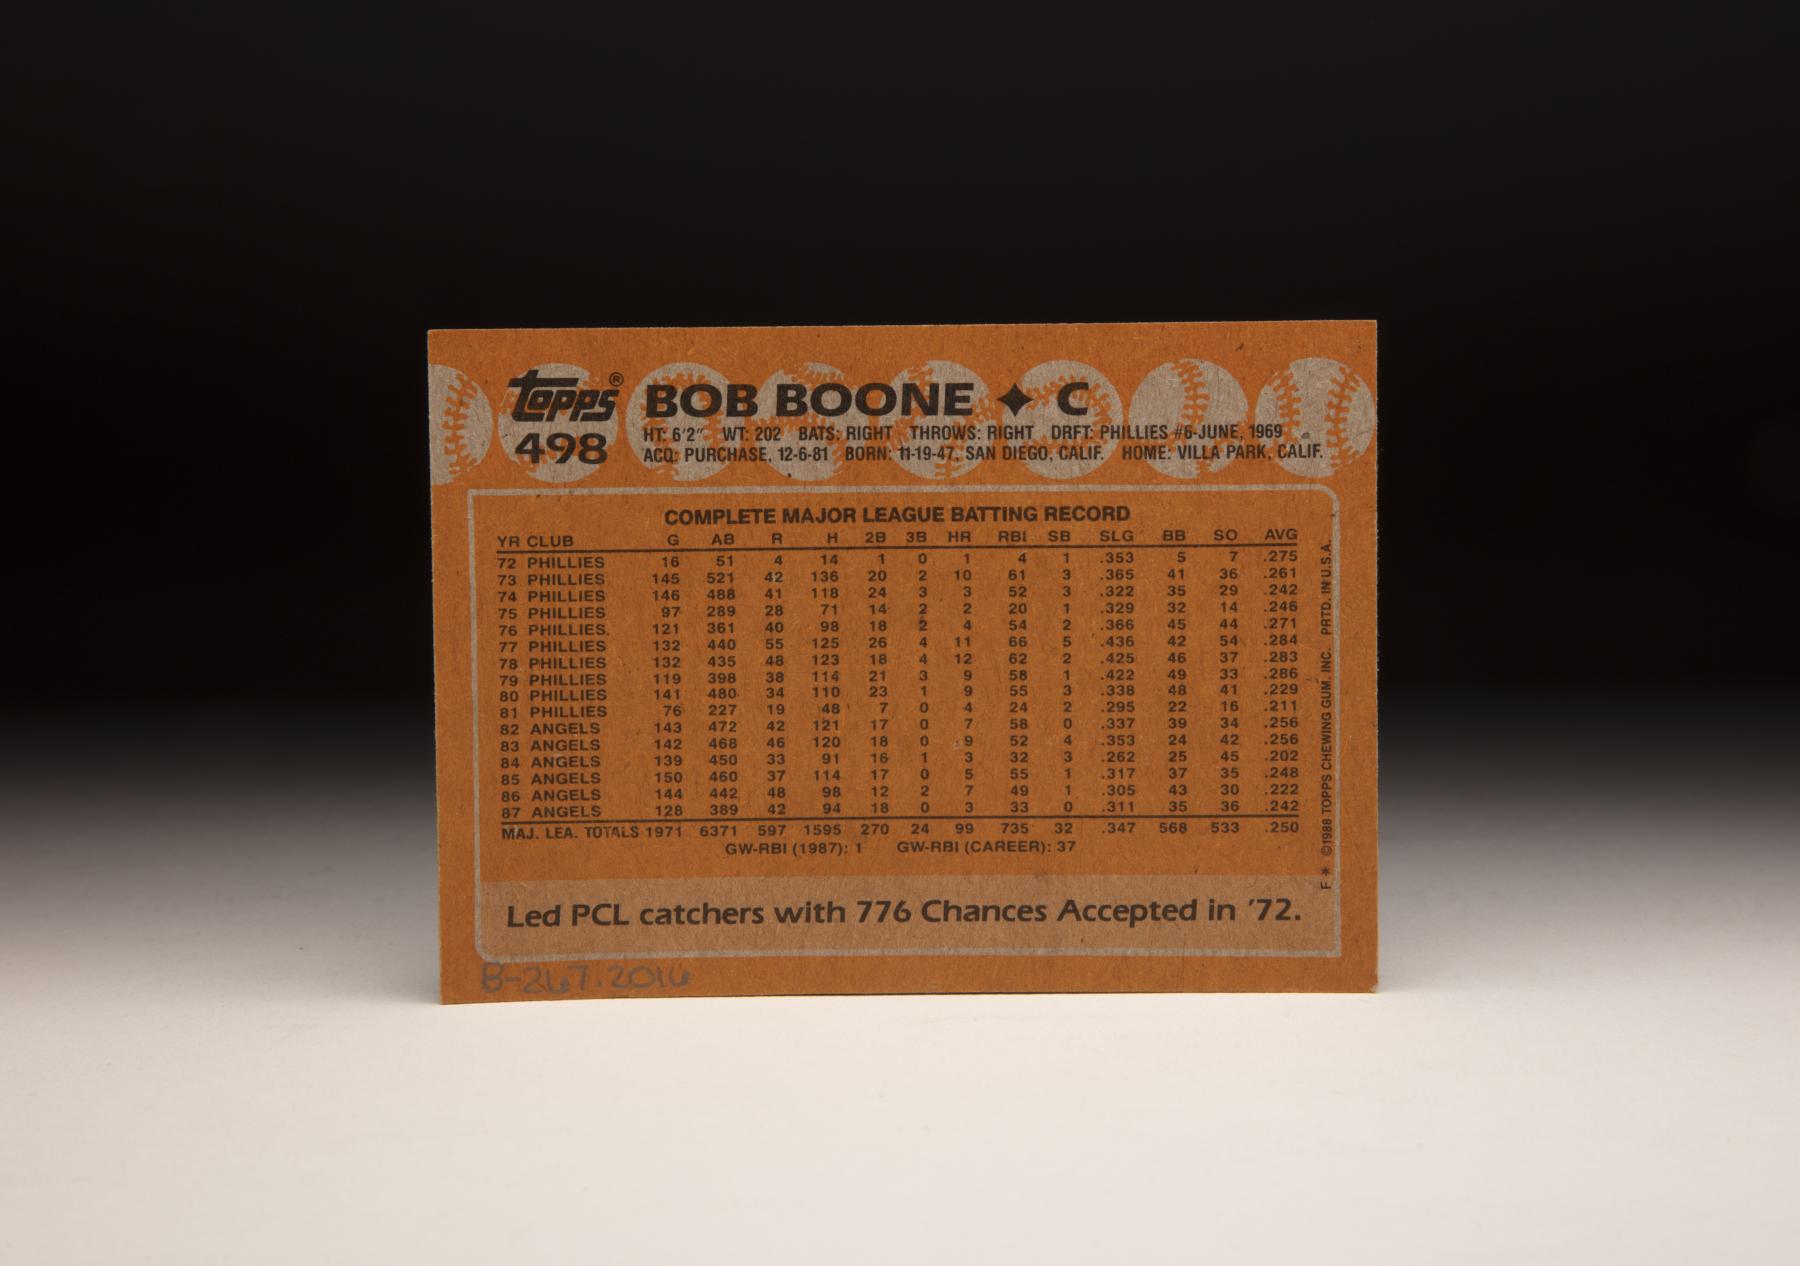 WHEN TOPPS HAD (BASE)BALLS!: A MISSING ROOKIE CUP- 1974 BOB BOONE